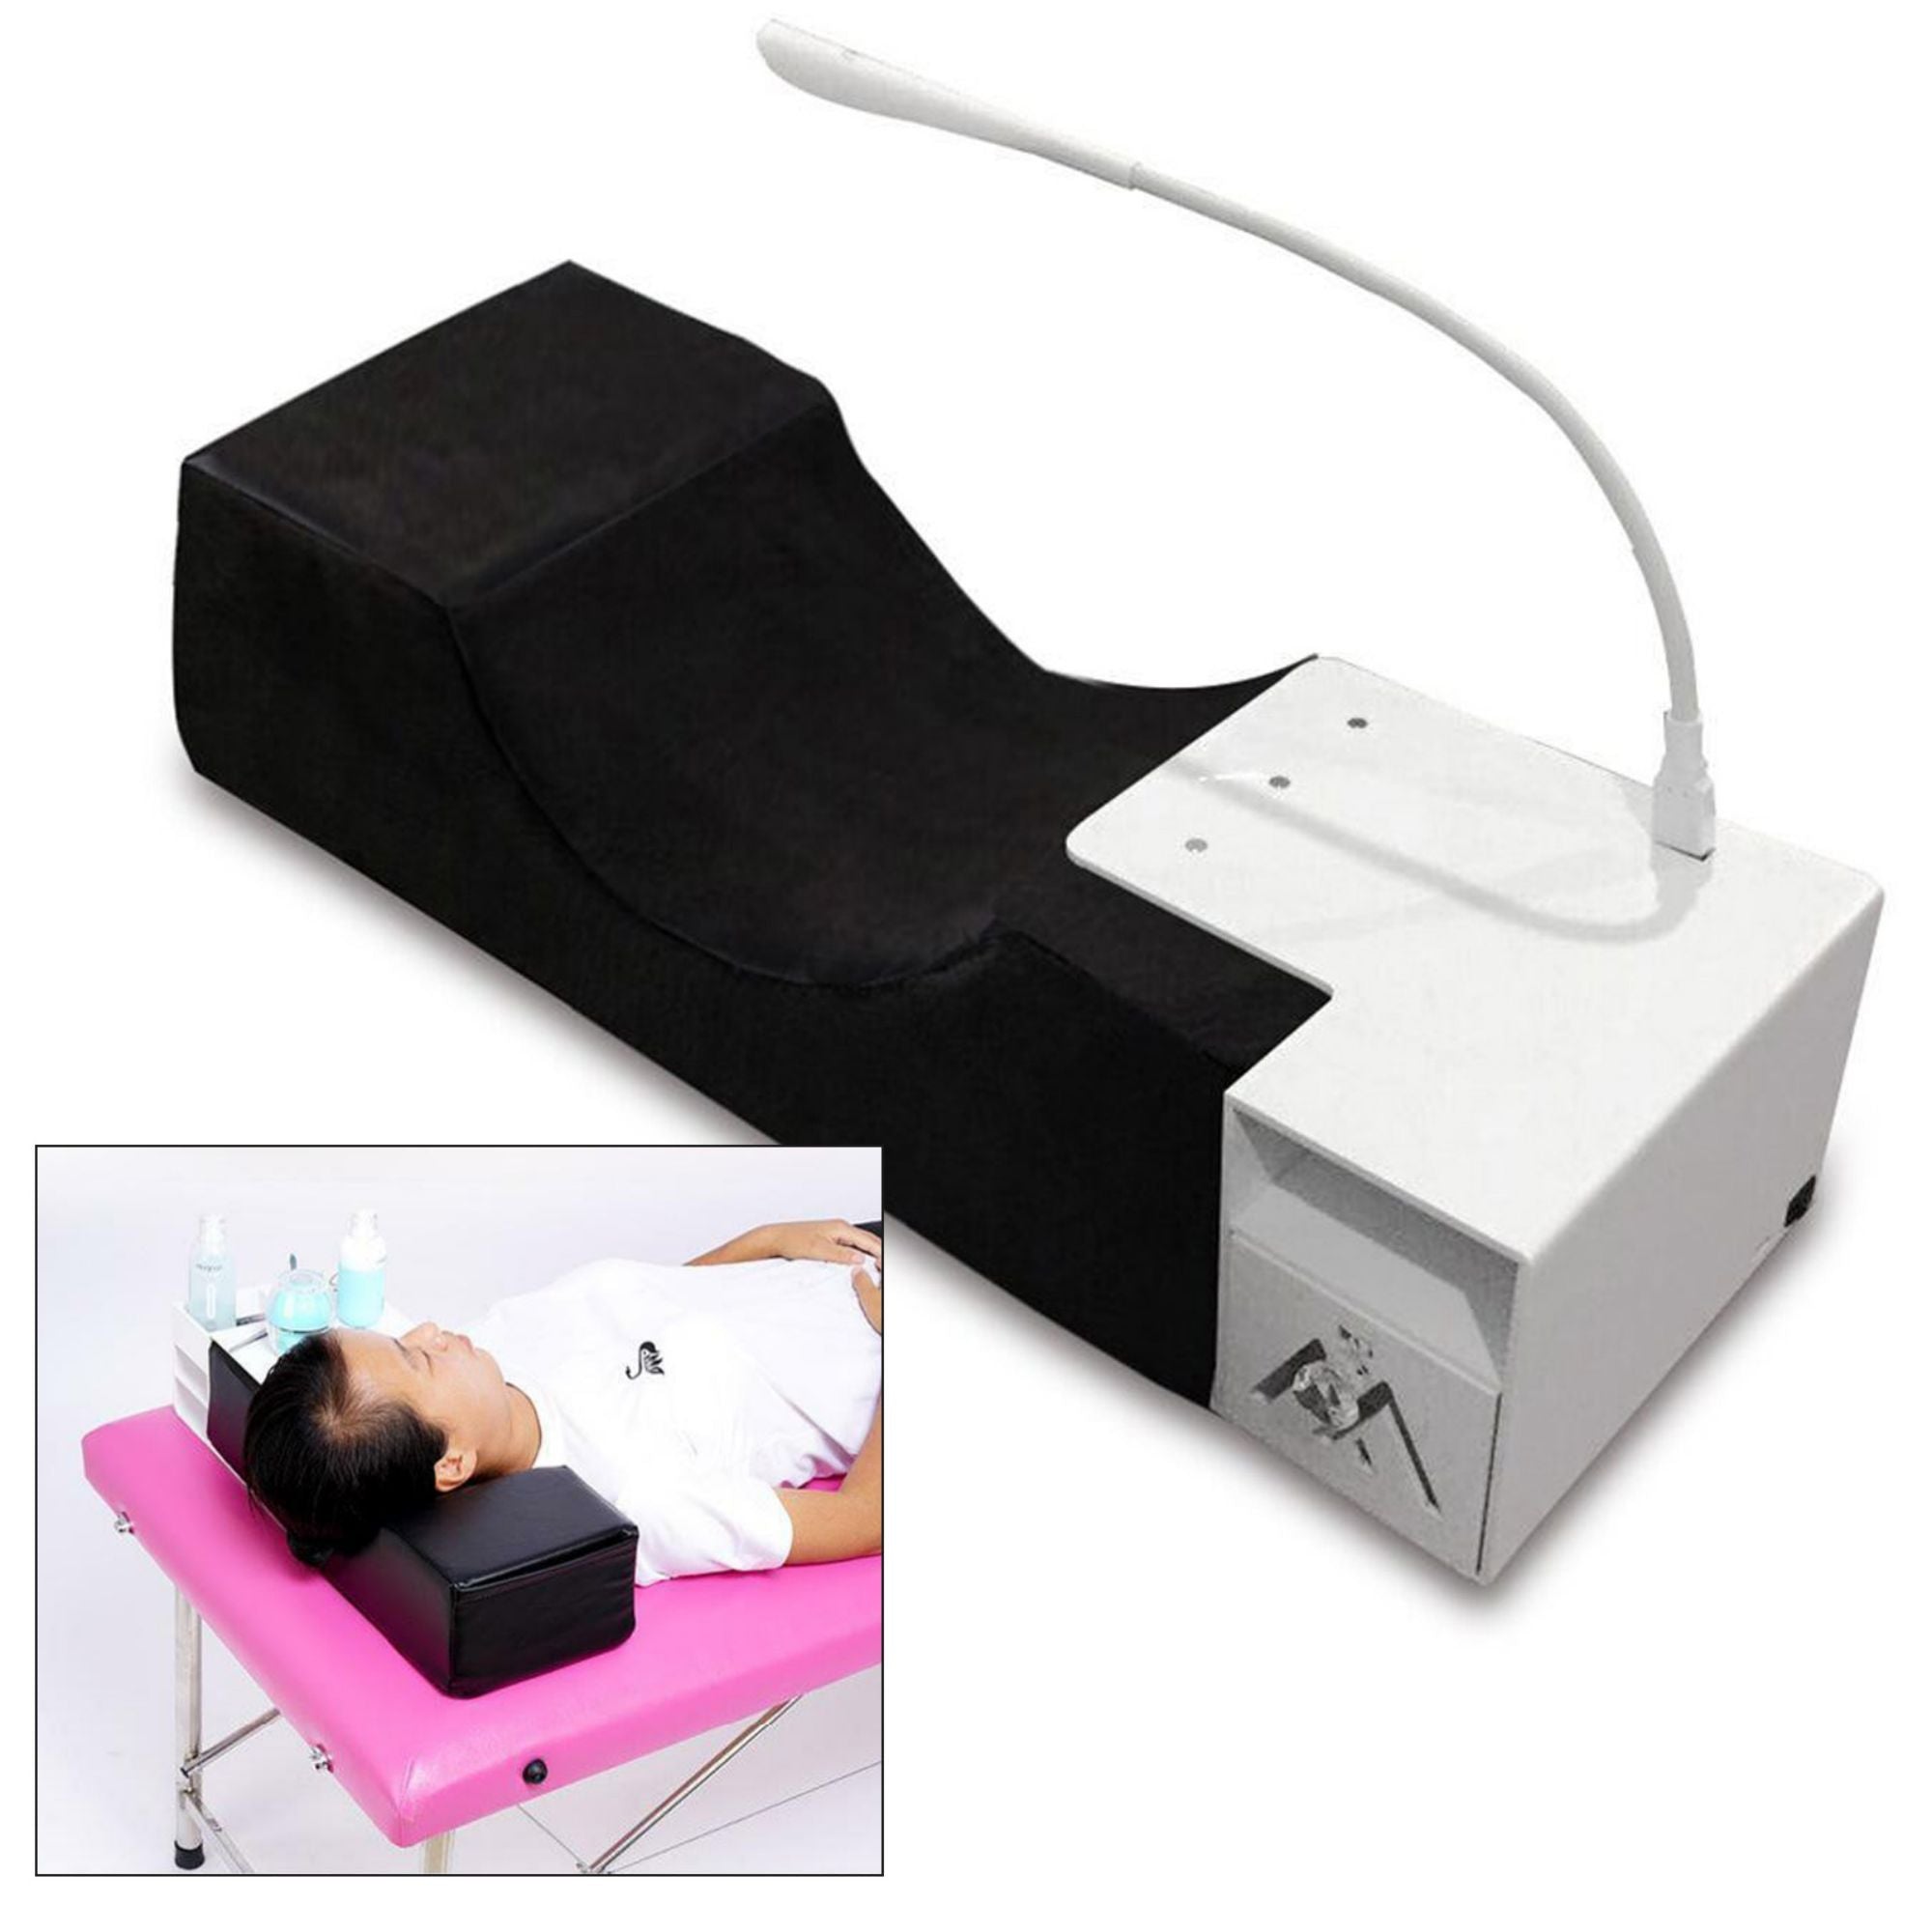 SHZICMY Beauty Lash Pillow for Lash Extension with Shelf Comfortable Memory Foam Eyelash Pillow Grafting for Salon Cervical Pillows Support for Protecting The Neck